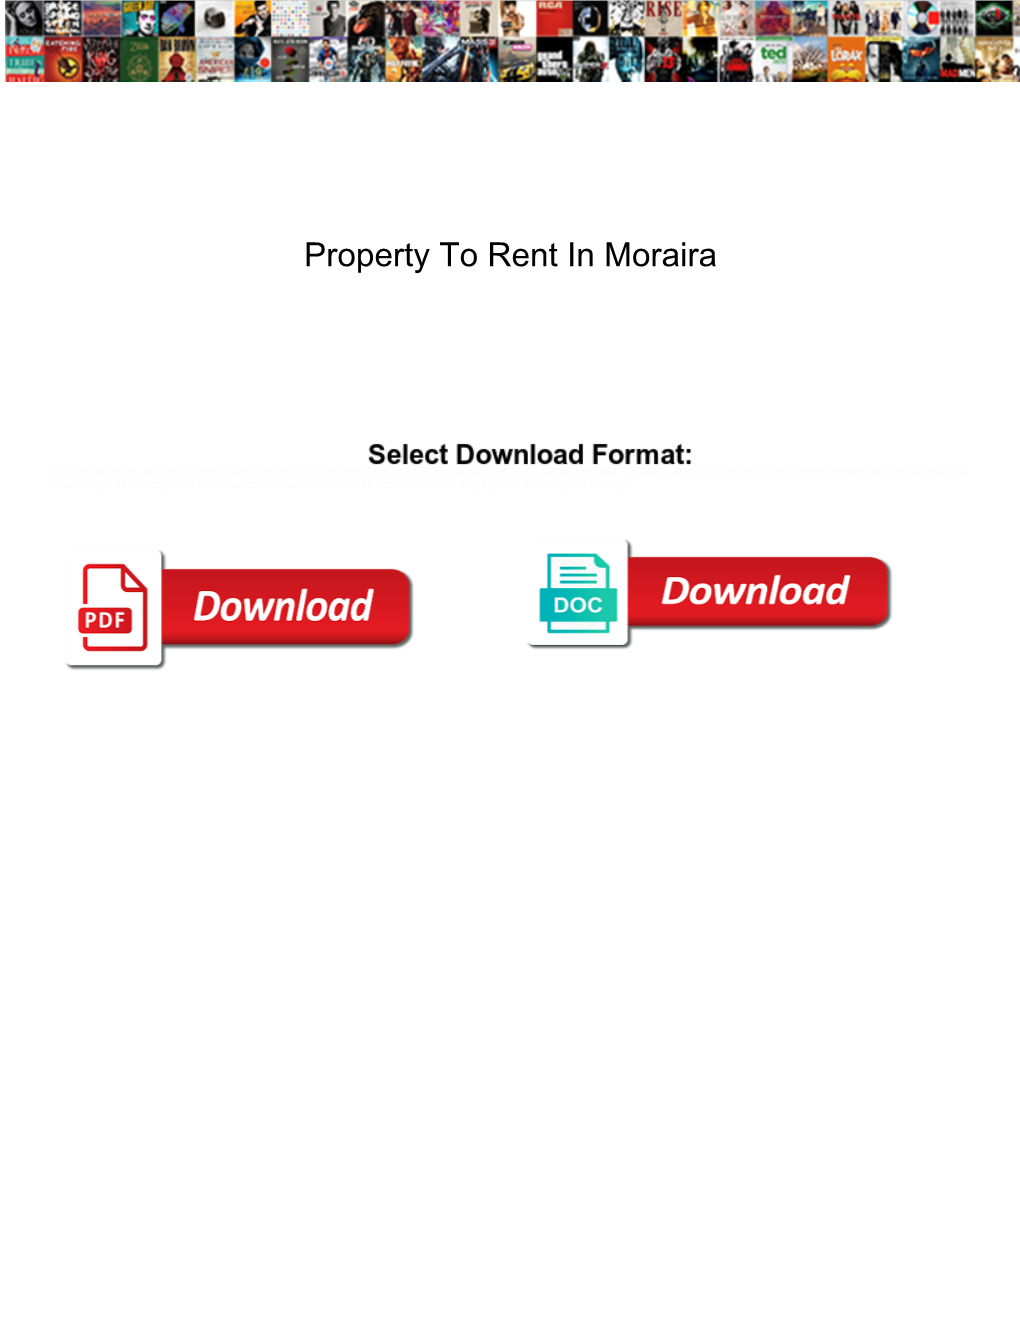 Property to Rent in Moraira